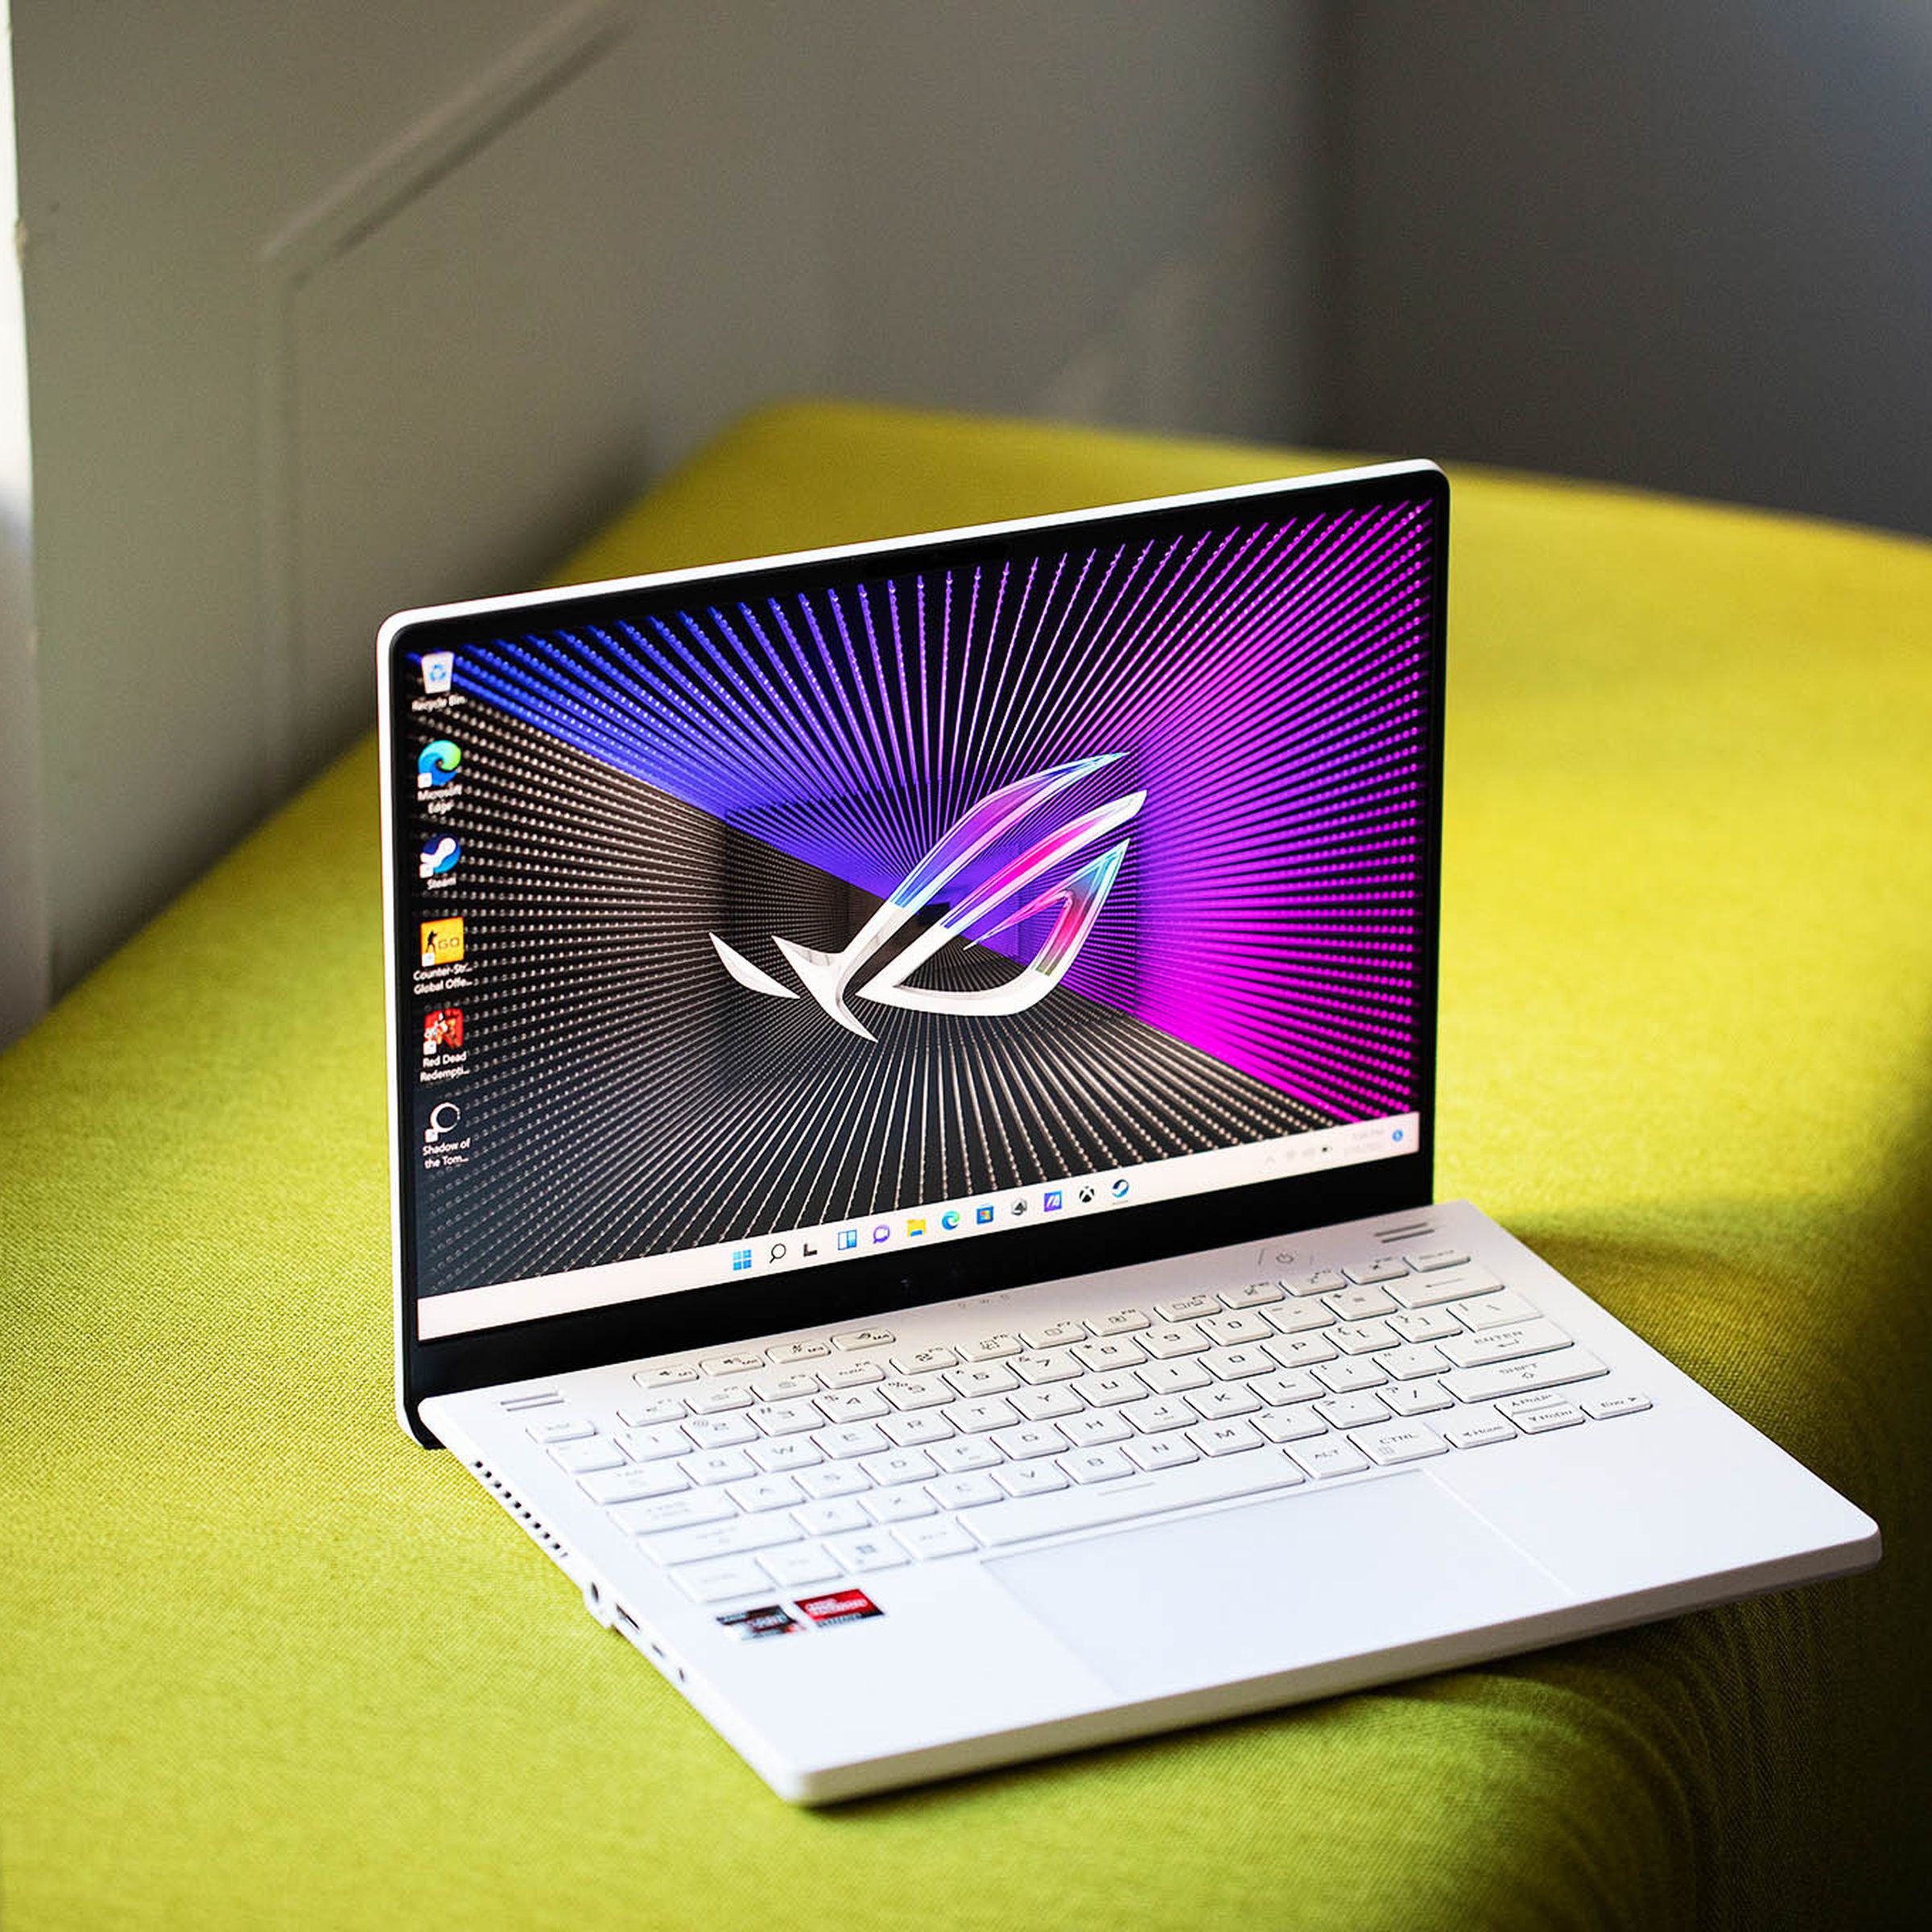 The Asus ROG Zephyrus G14 on a green bench open angled slightly to the right. The screen displays a black and purple background with the ROG logo.